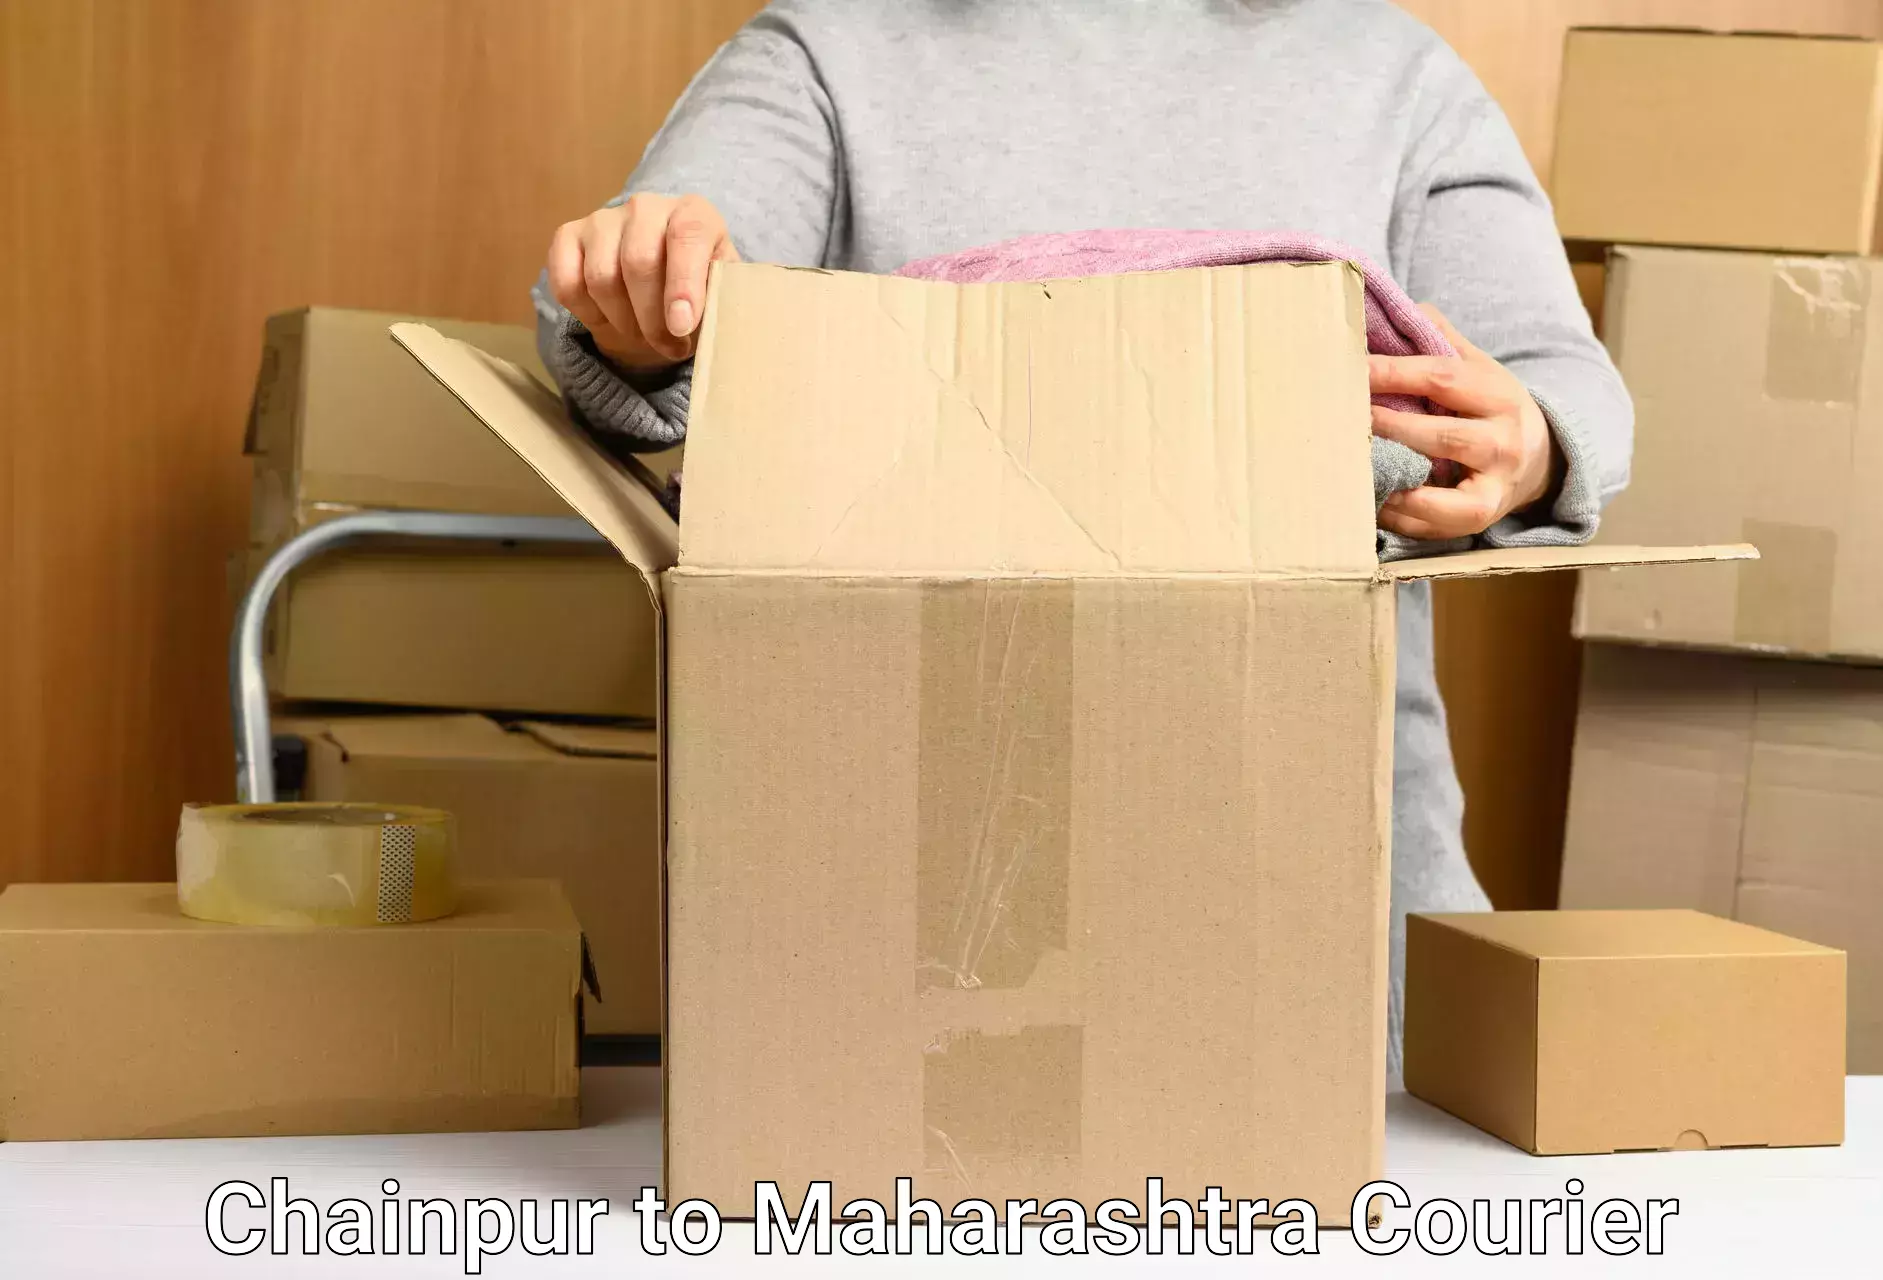 Courier service innovation in Chainpur to Maharashtra